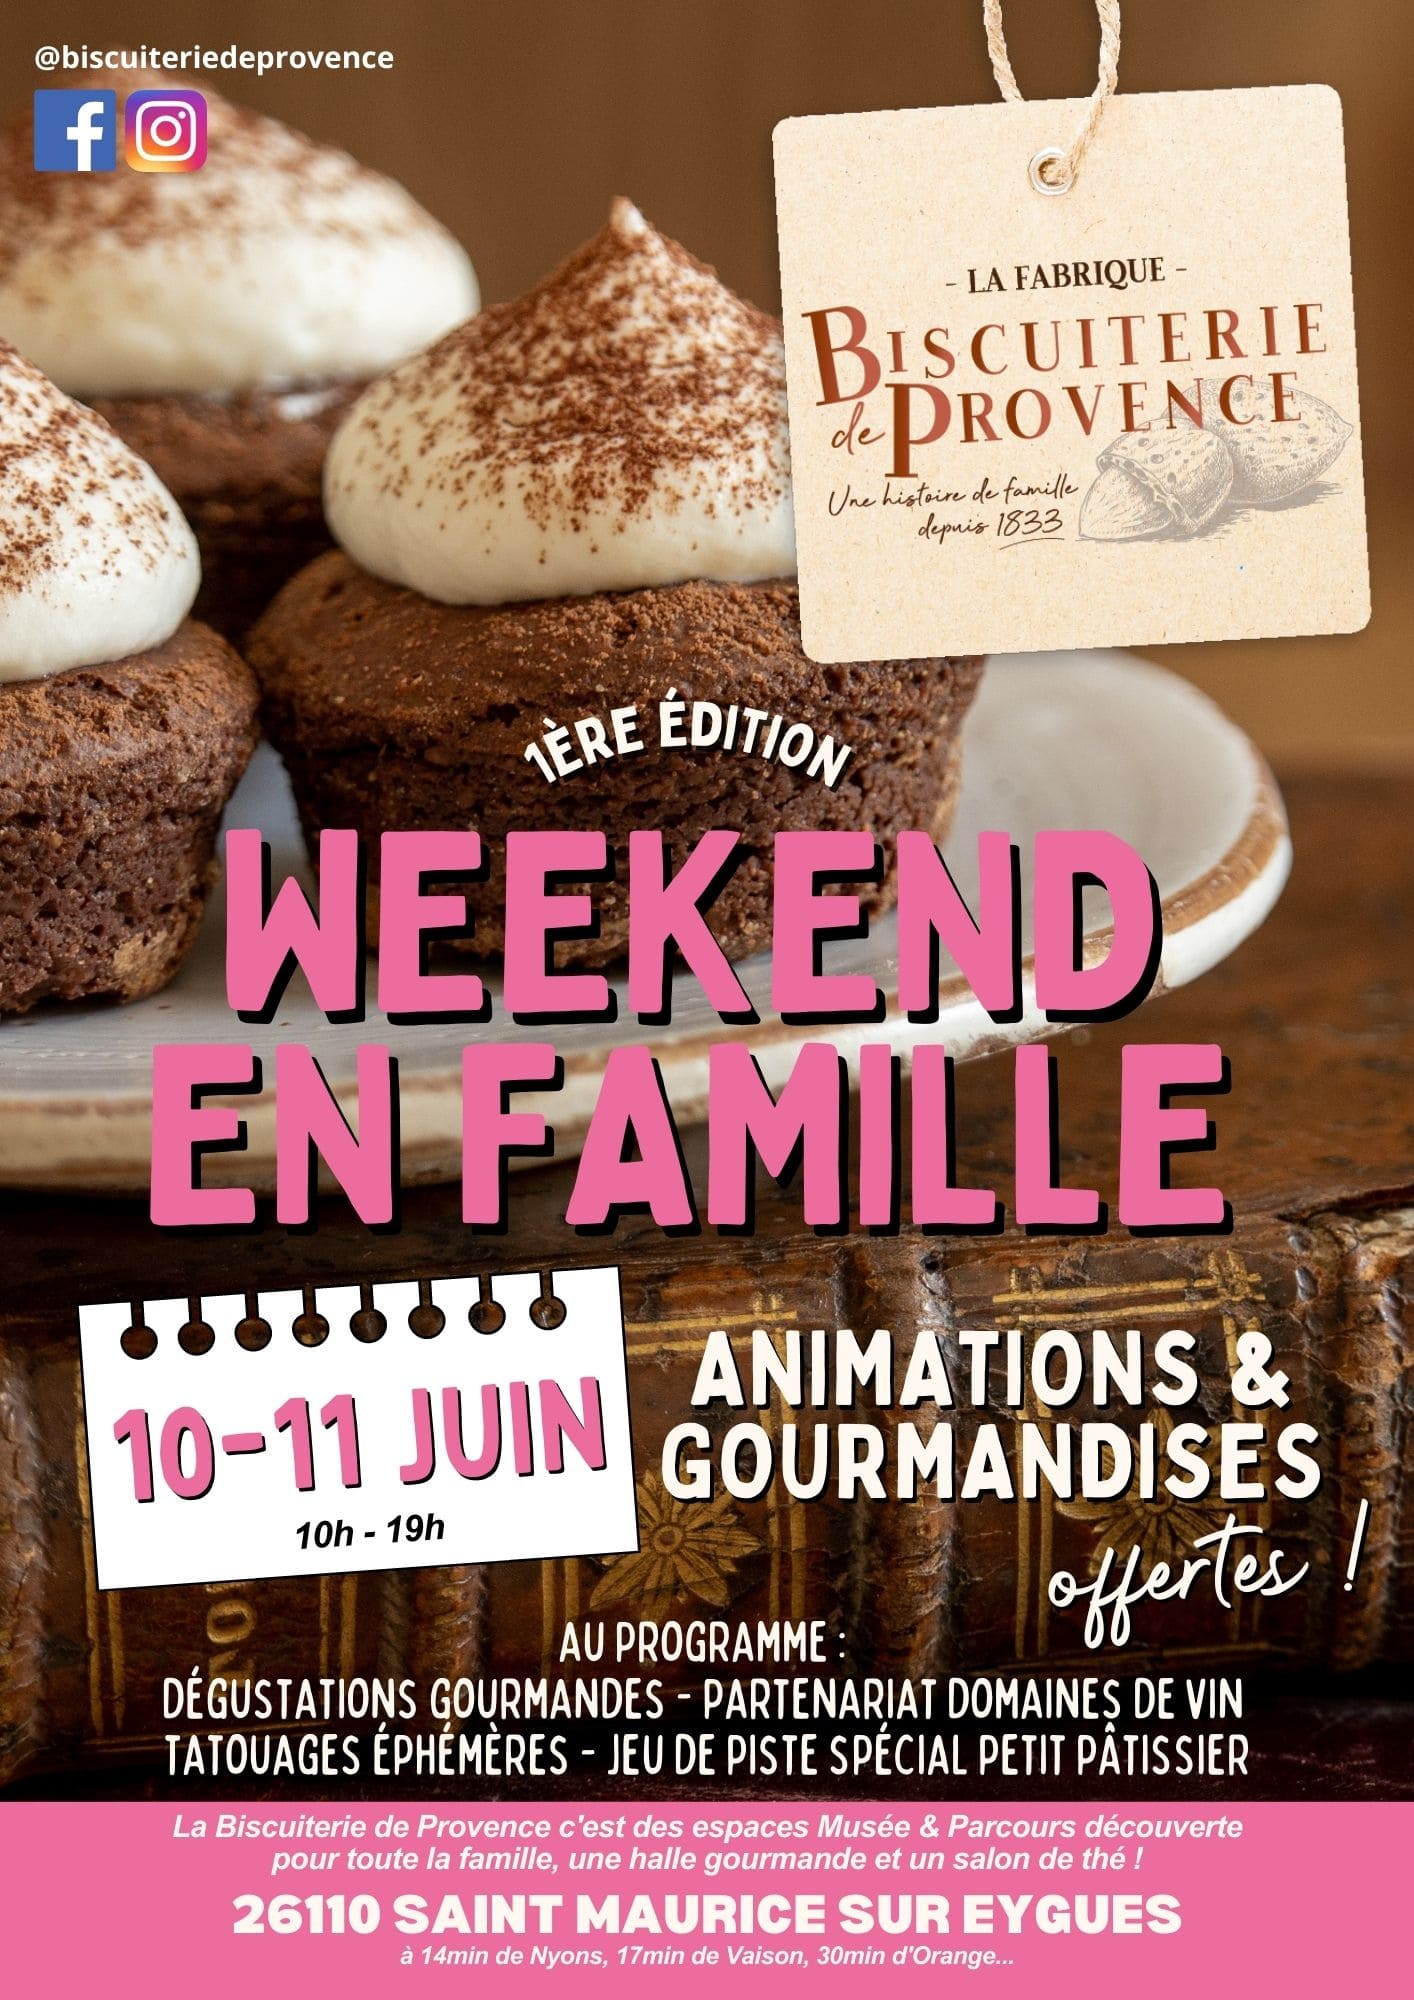 A family week-end at La Biscuiterie de Provence !